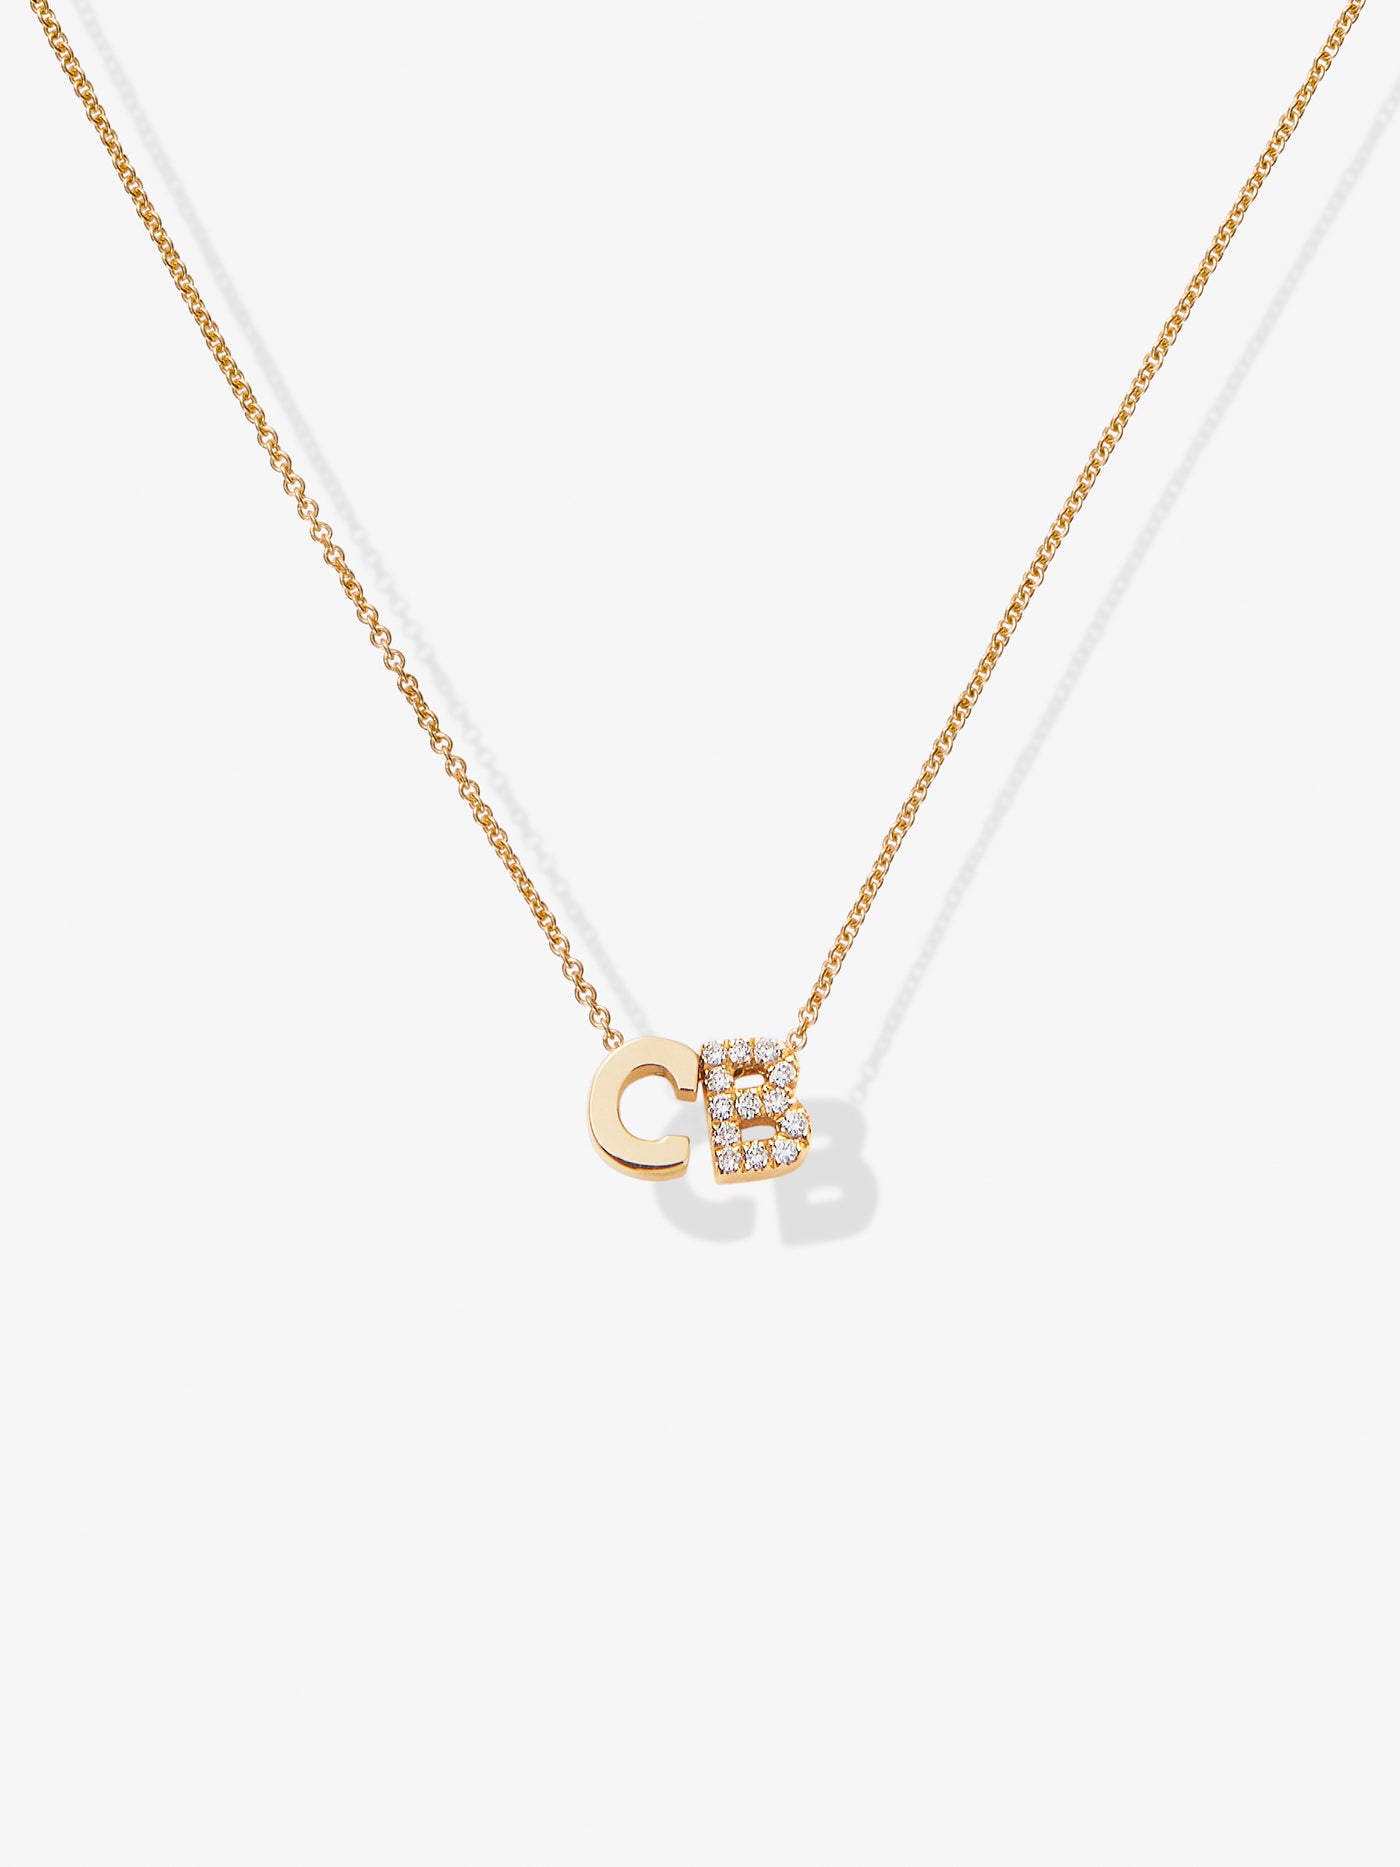 Two Letters Gold and Diamond 18-Karat Gold Necklace Regular price